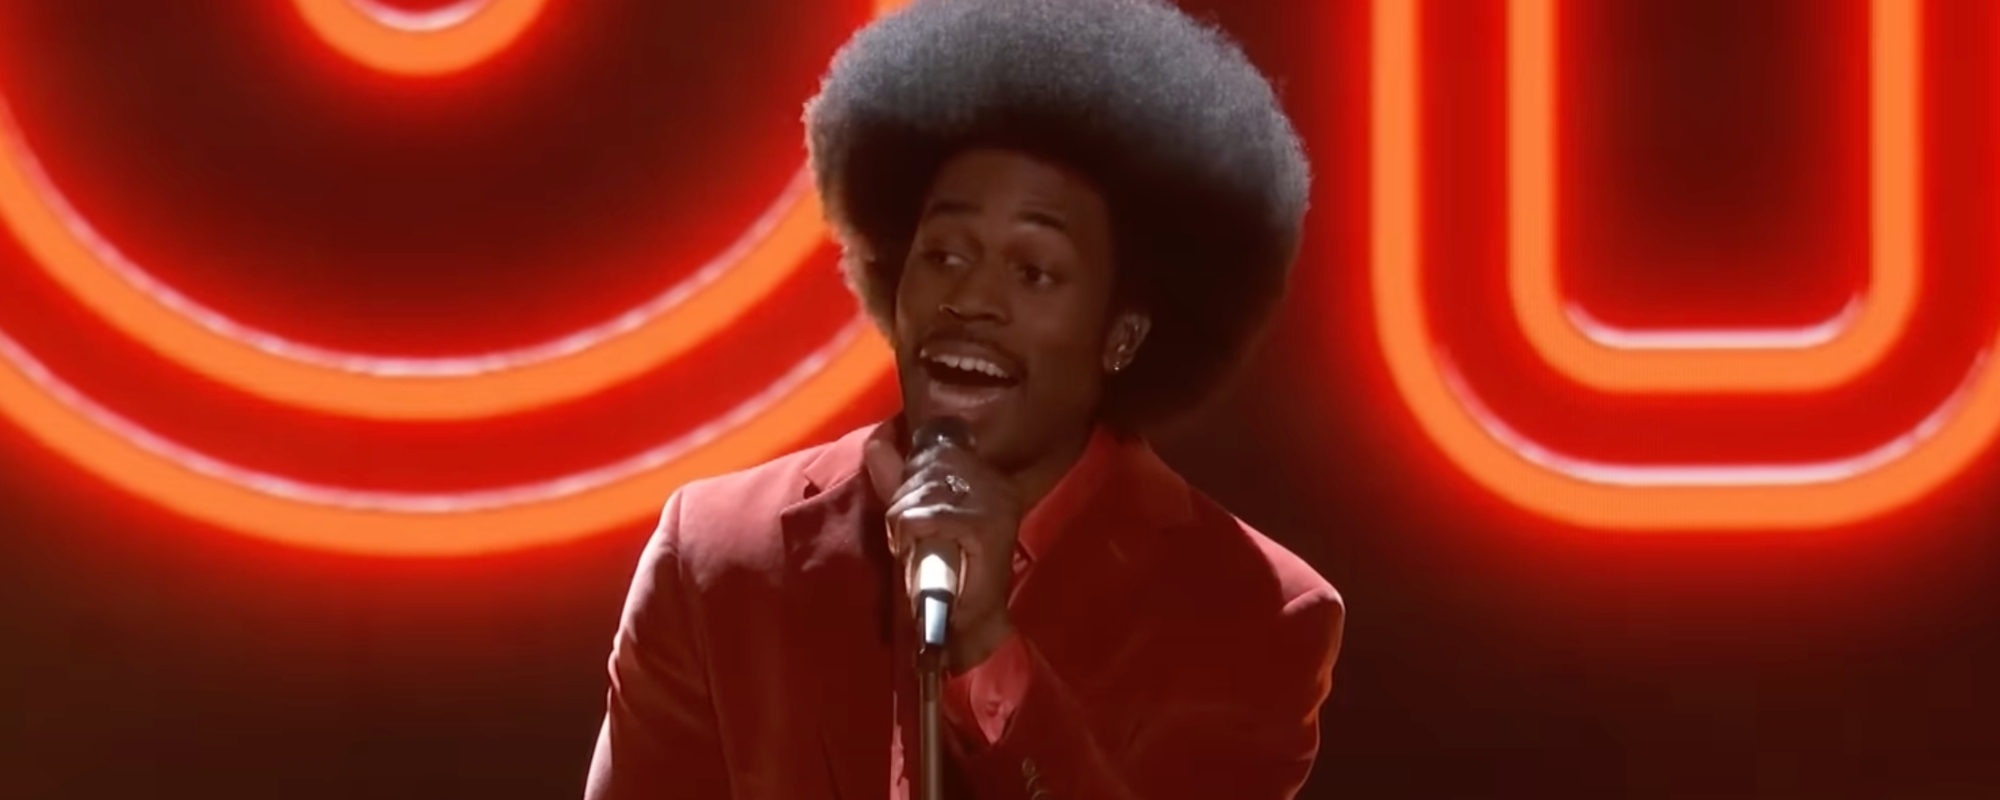 Nathan Chester Nails an Otis Redding Classic That Has ‘The Voice’ Fans Casting Their Votes